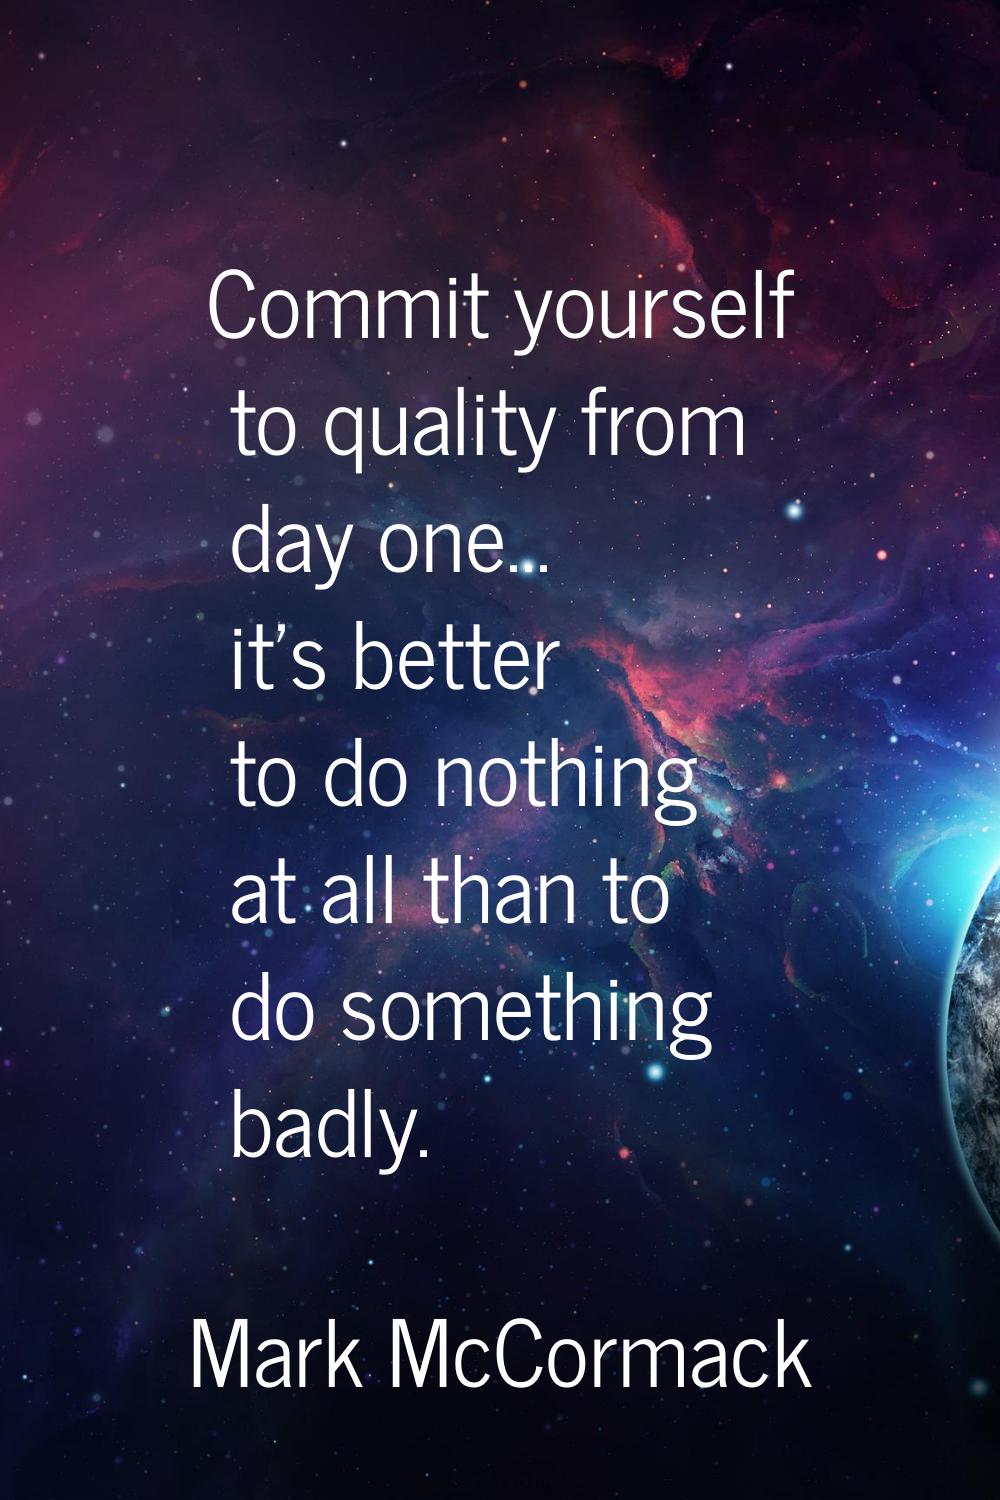 Commit yourself to quality from day one... it's better to do nothing at all than to do something ba